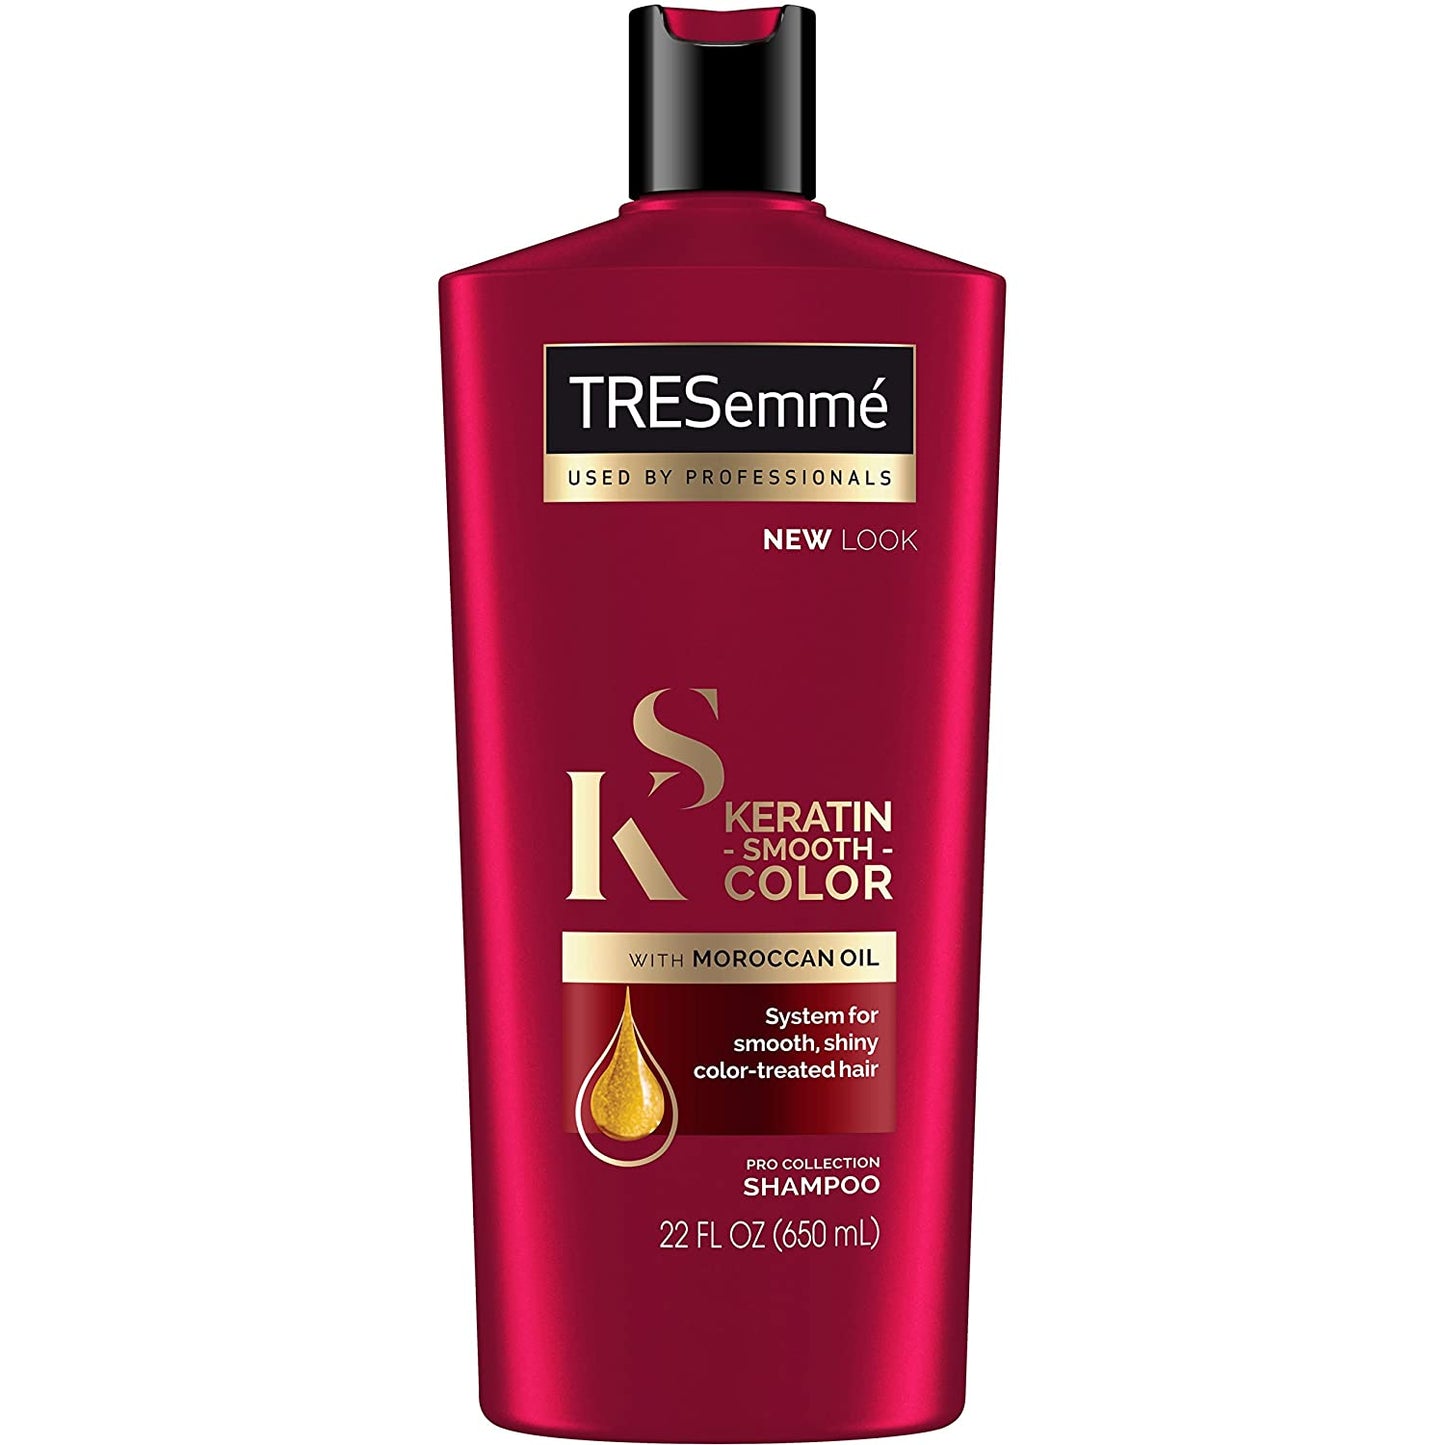 Tresemme Shampoo Keratin Smooth Color With Moroccan Oil, 650 ml